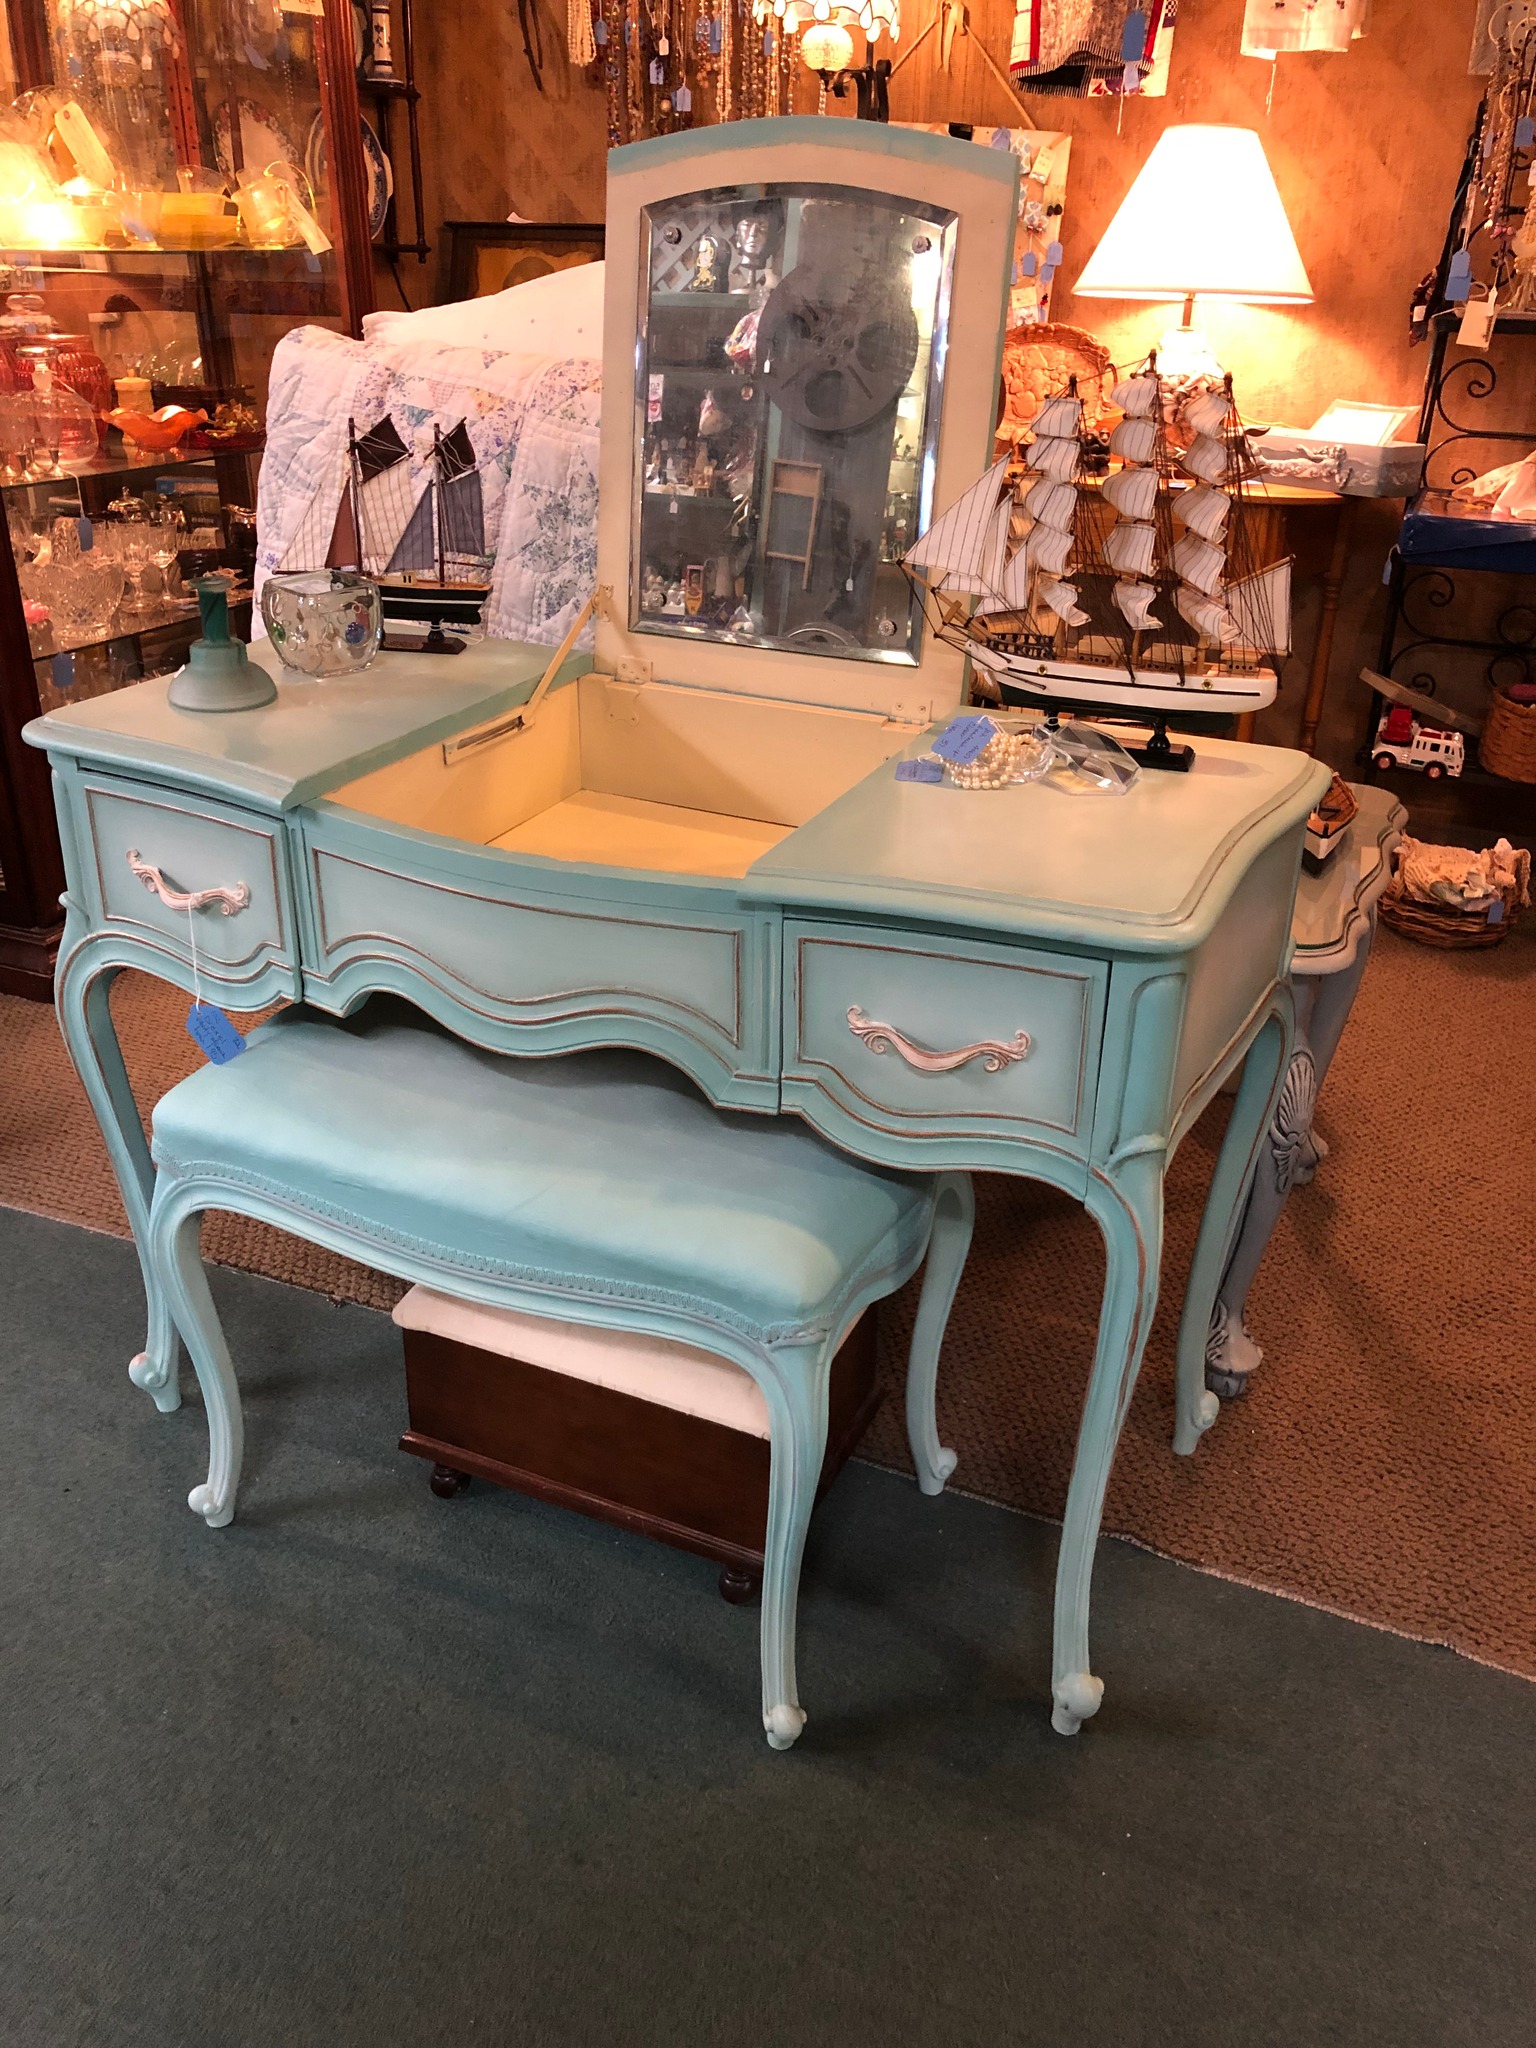 Scranberry Snapshots - Scranberry Coop Receives 2022 Best of Andover Award! - Scranberry Coop - Vintage Store - Antiques, Collectibles, & More